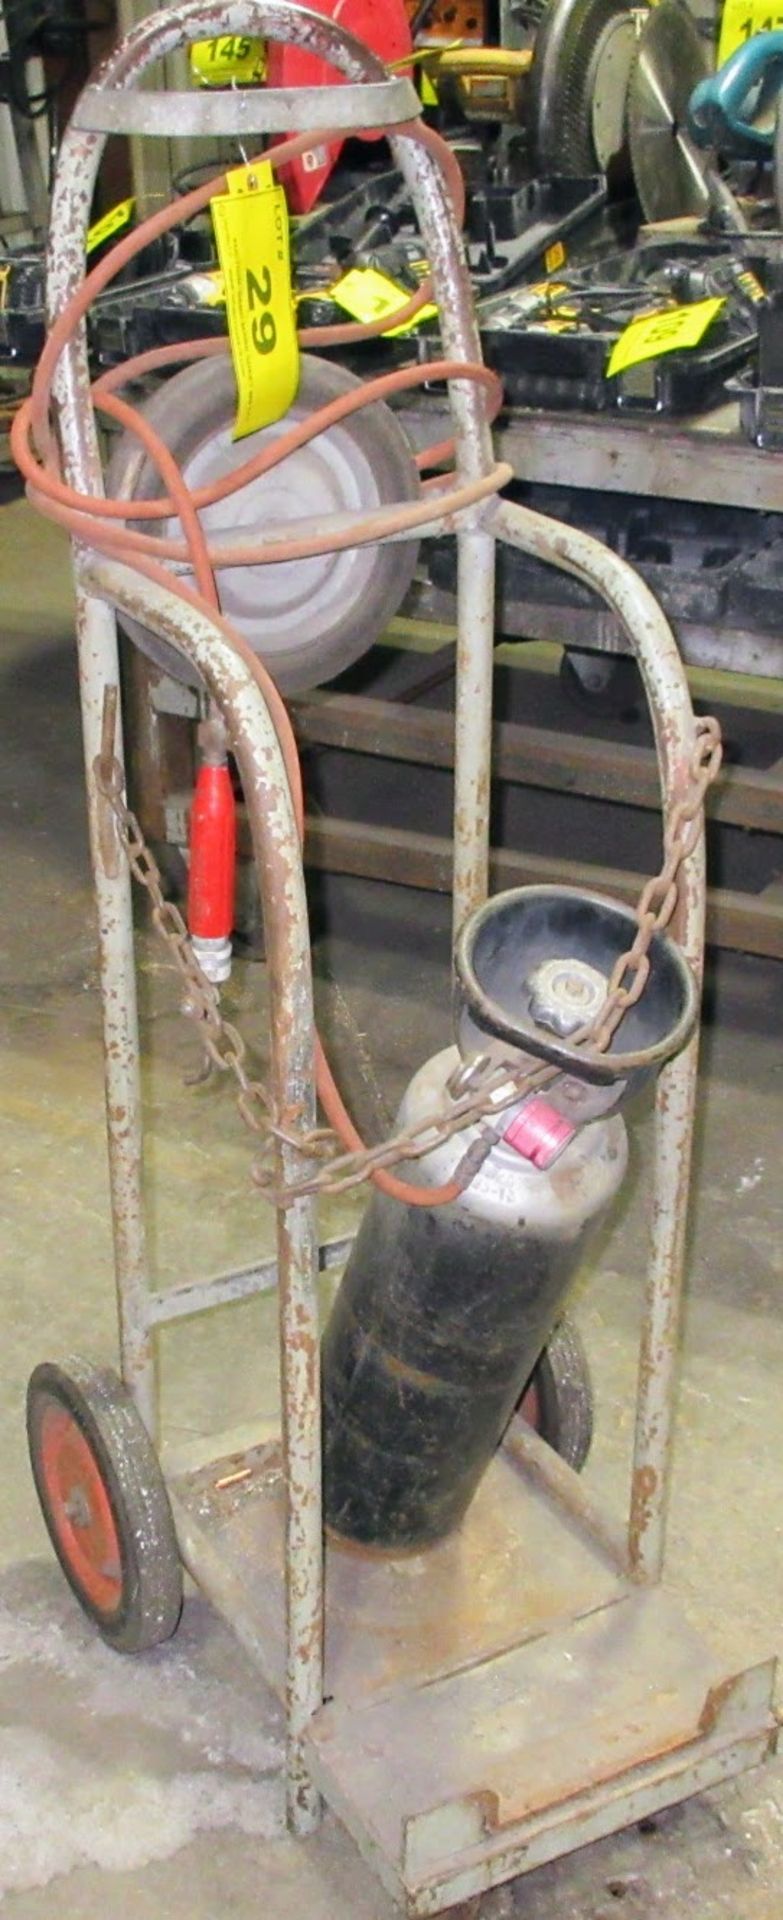 SINGLE TANK CART W/ TANK, CABLES AND TORCH